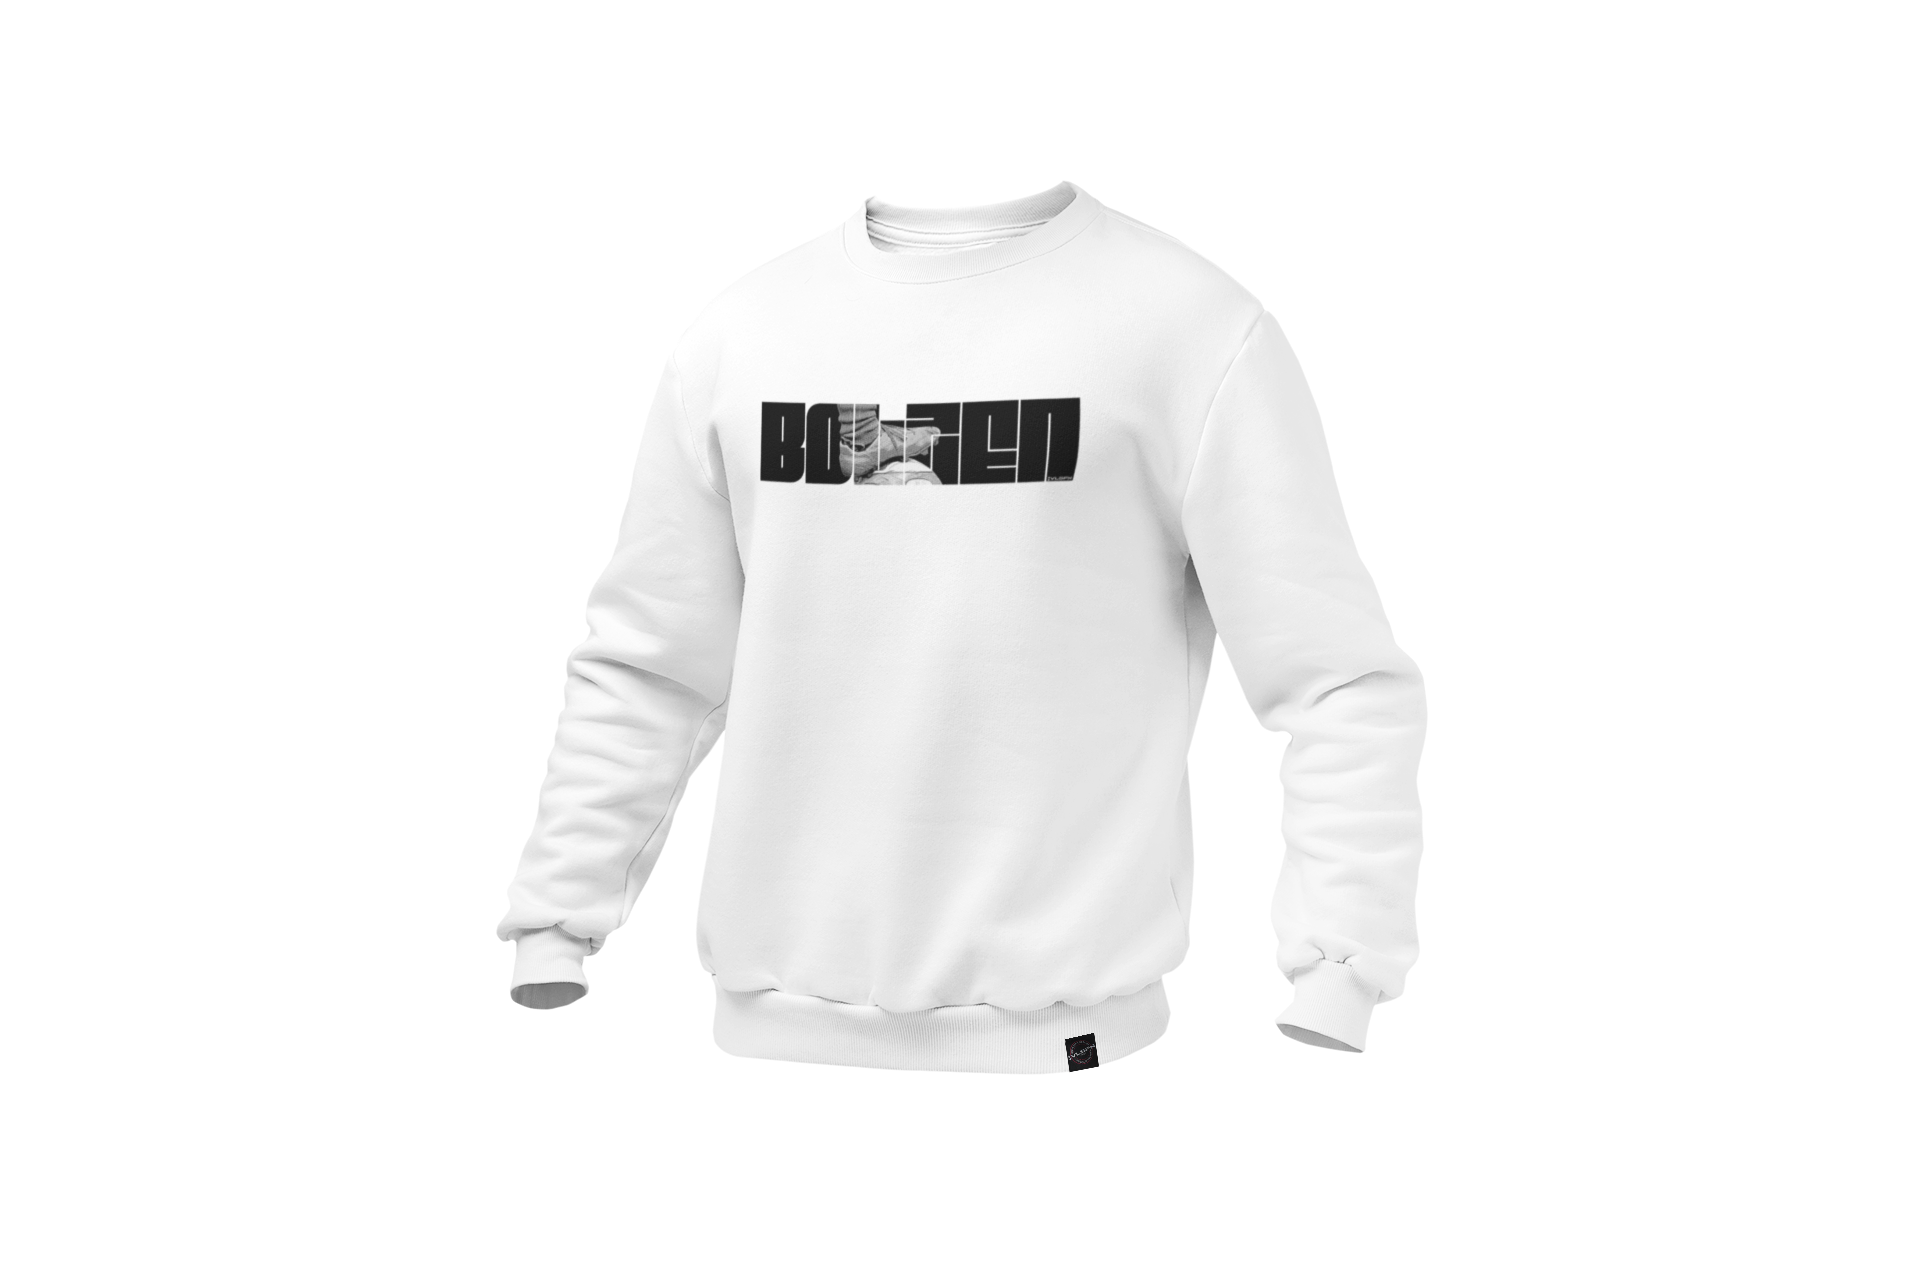 mockup-of-a-ghosted-crewneck-sweatshirt-over-a-solid-background-26960 (27).png